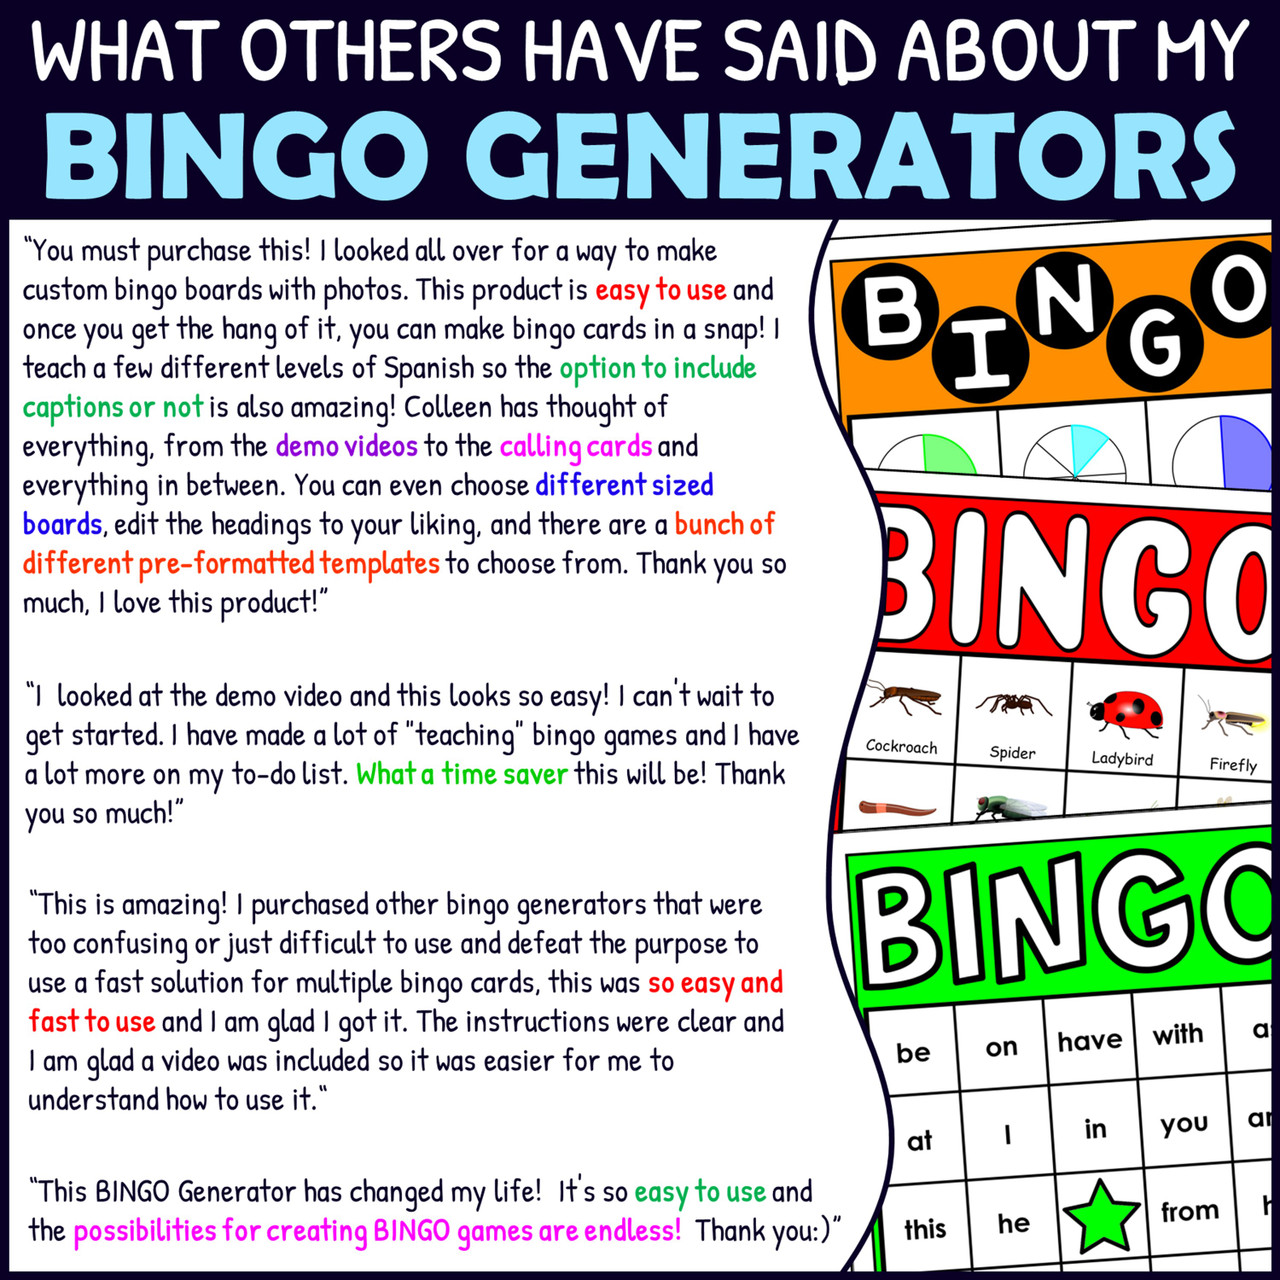 Learn English and Spanish Vocabulary with These Bilingual Versions of Bingo  - The Toy Insider